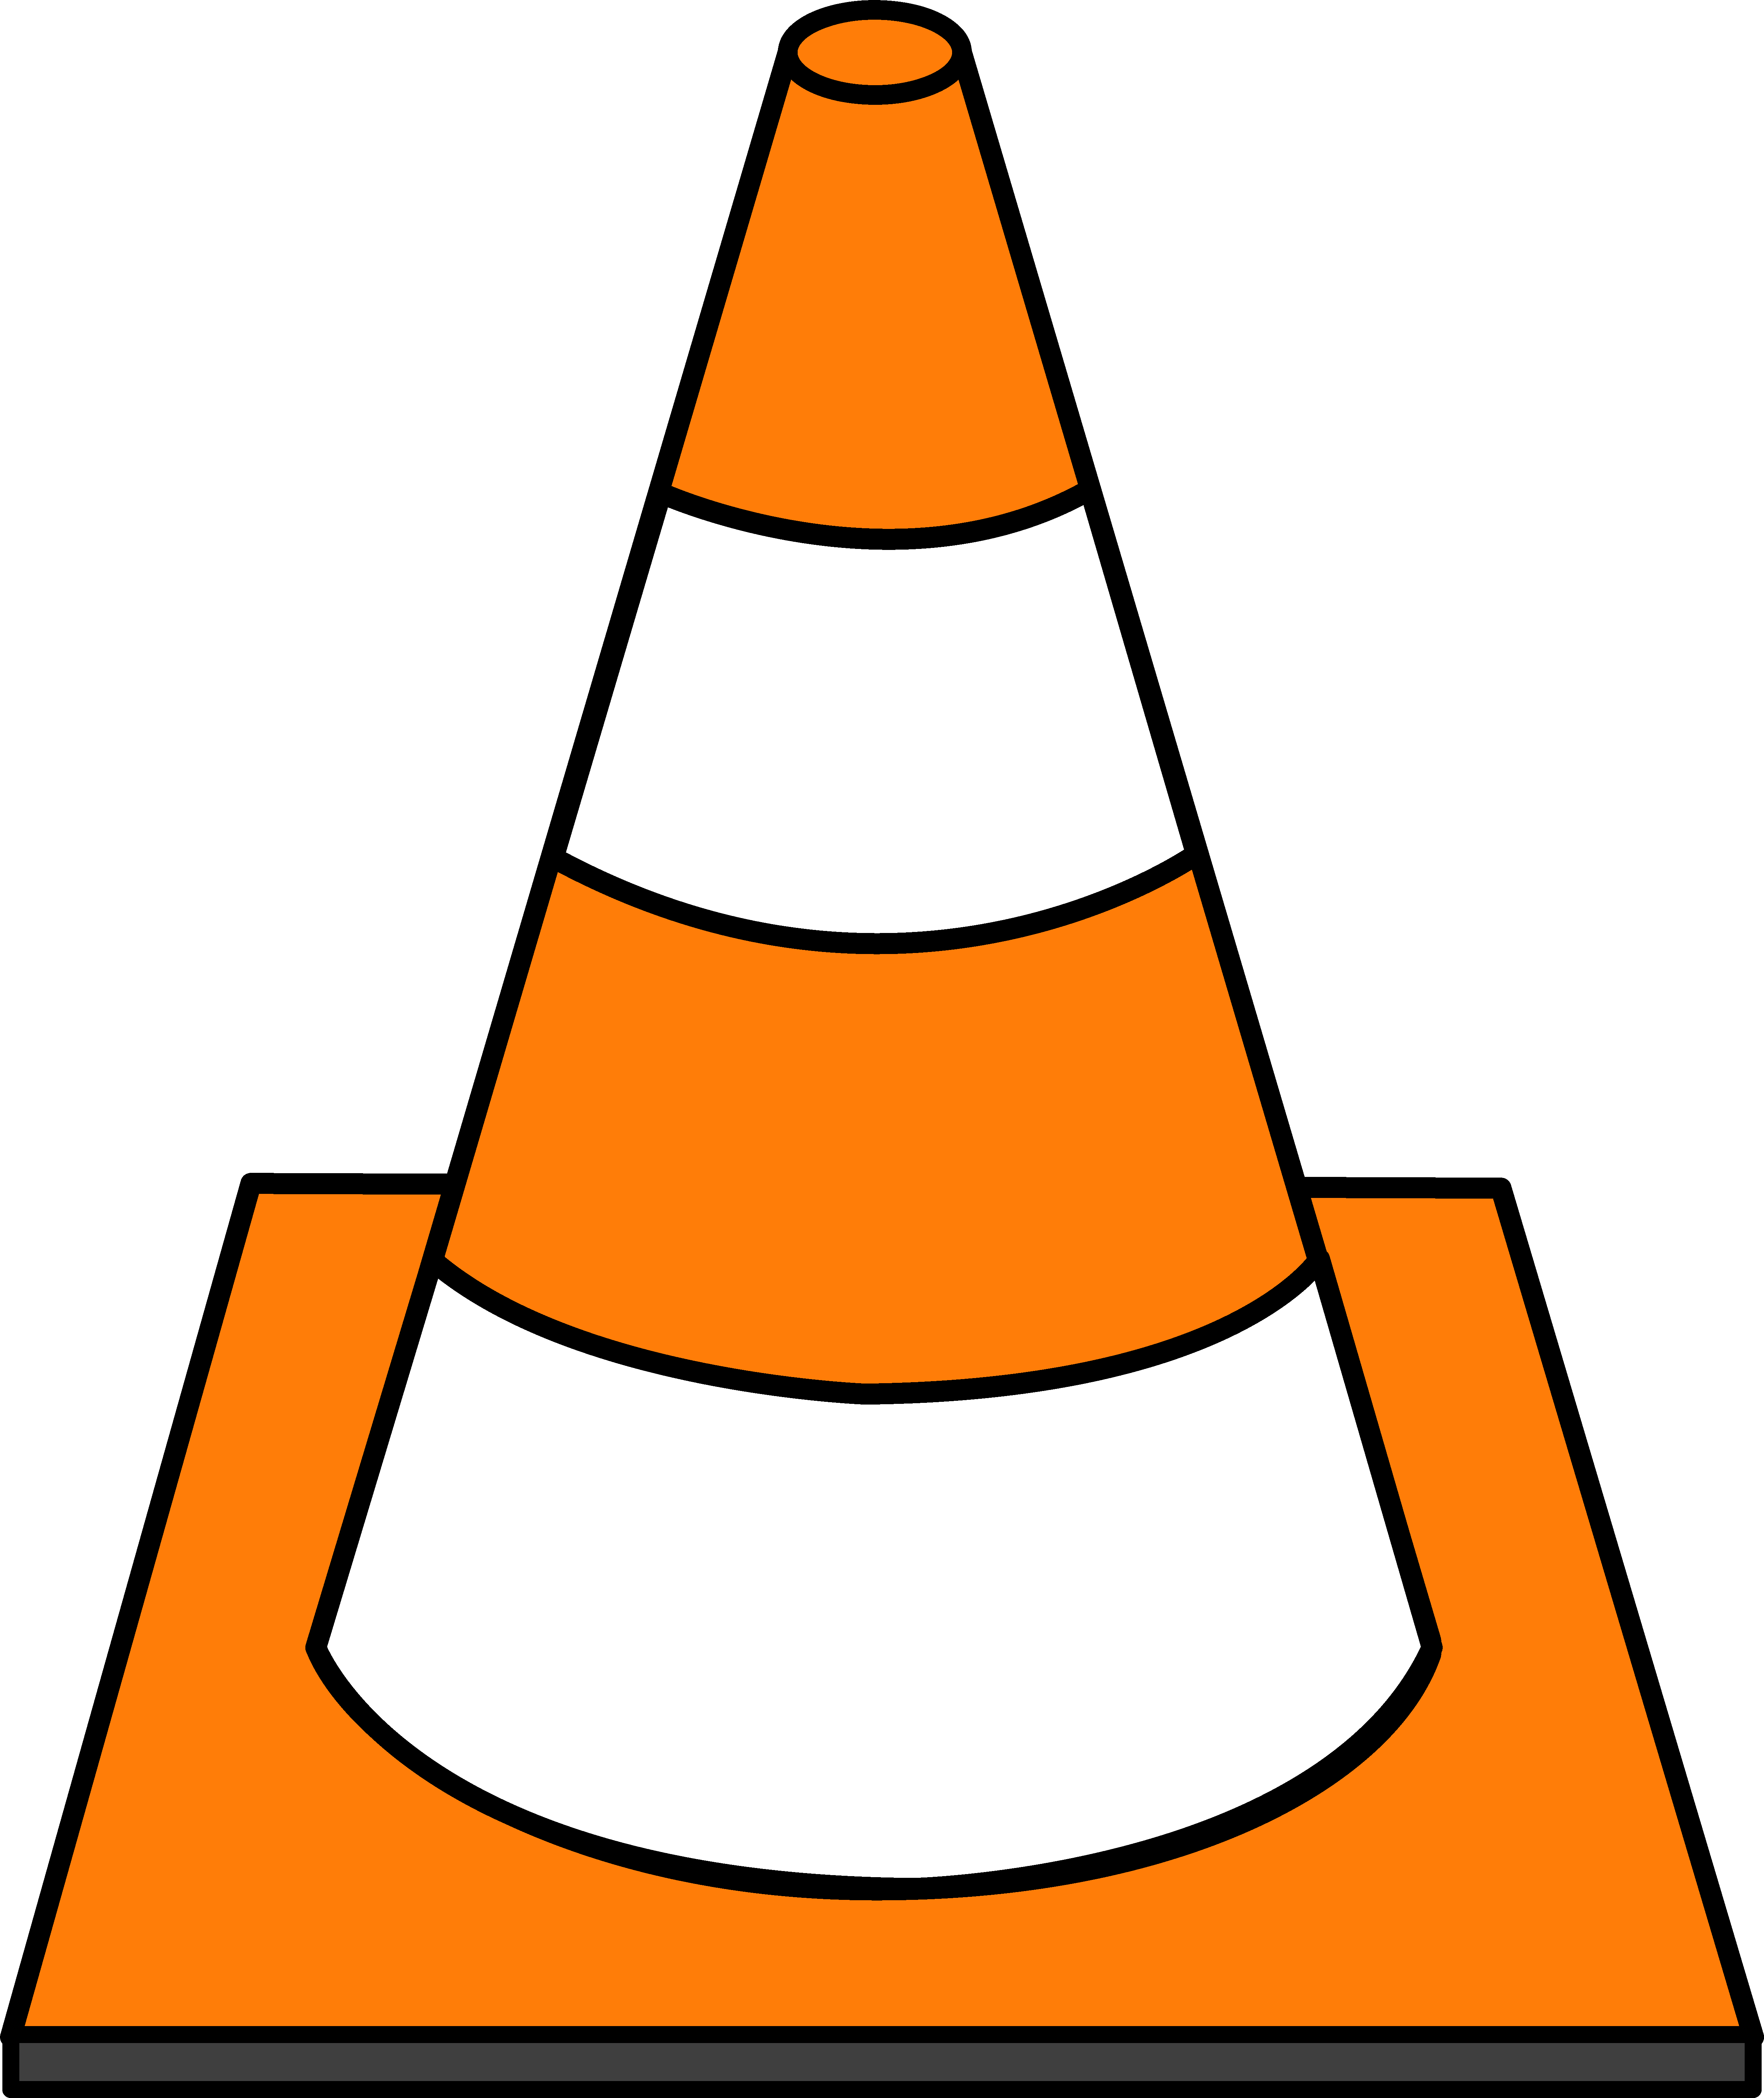 Highway clipart route. Striped road cone under